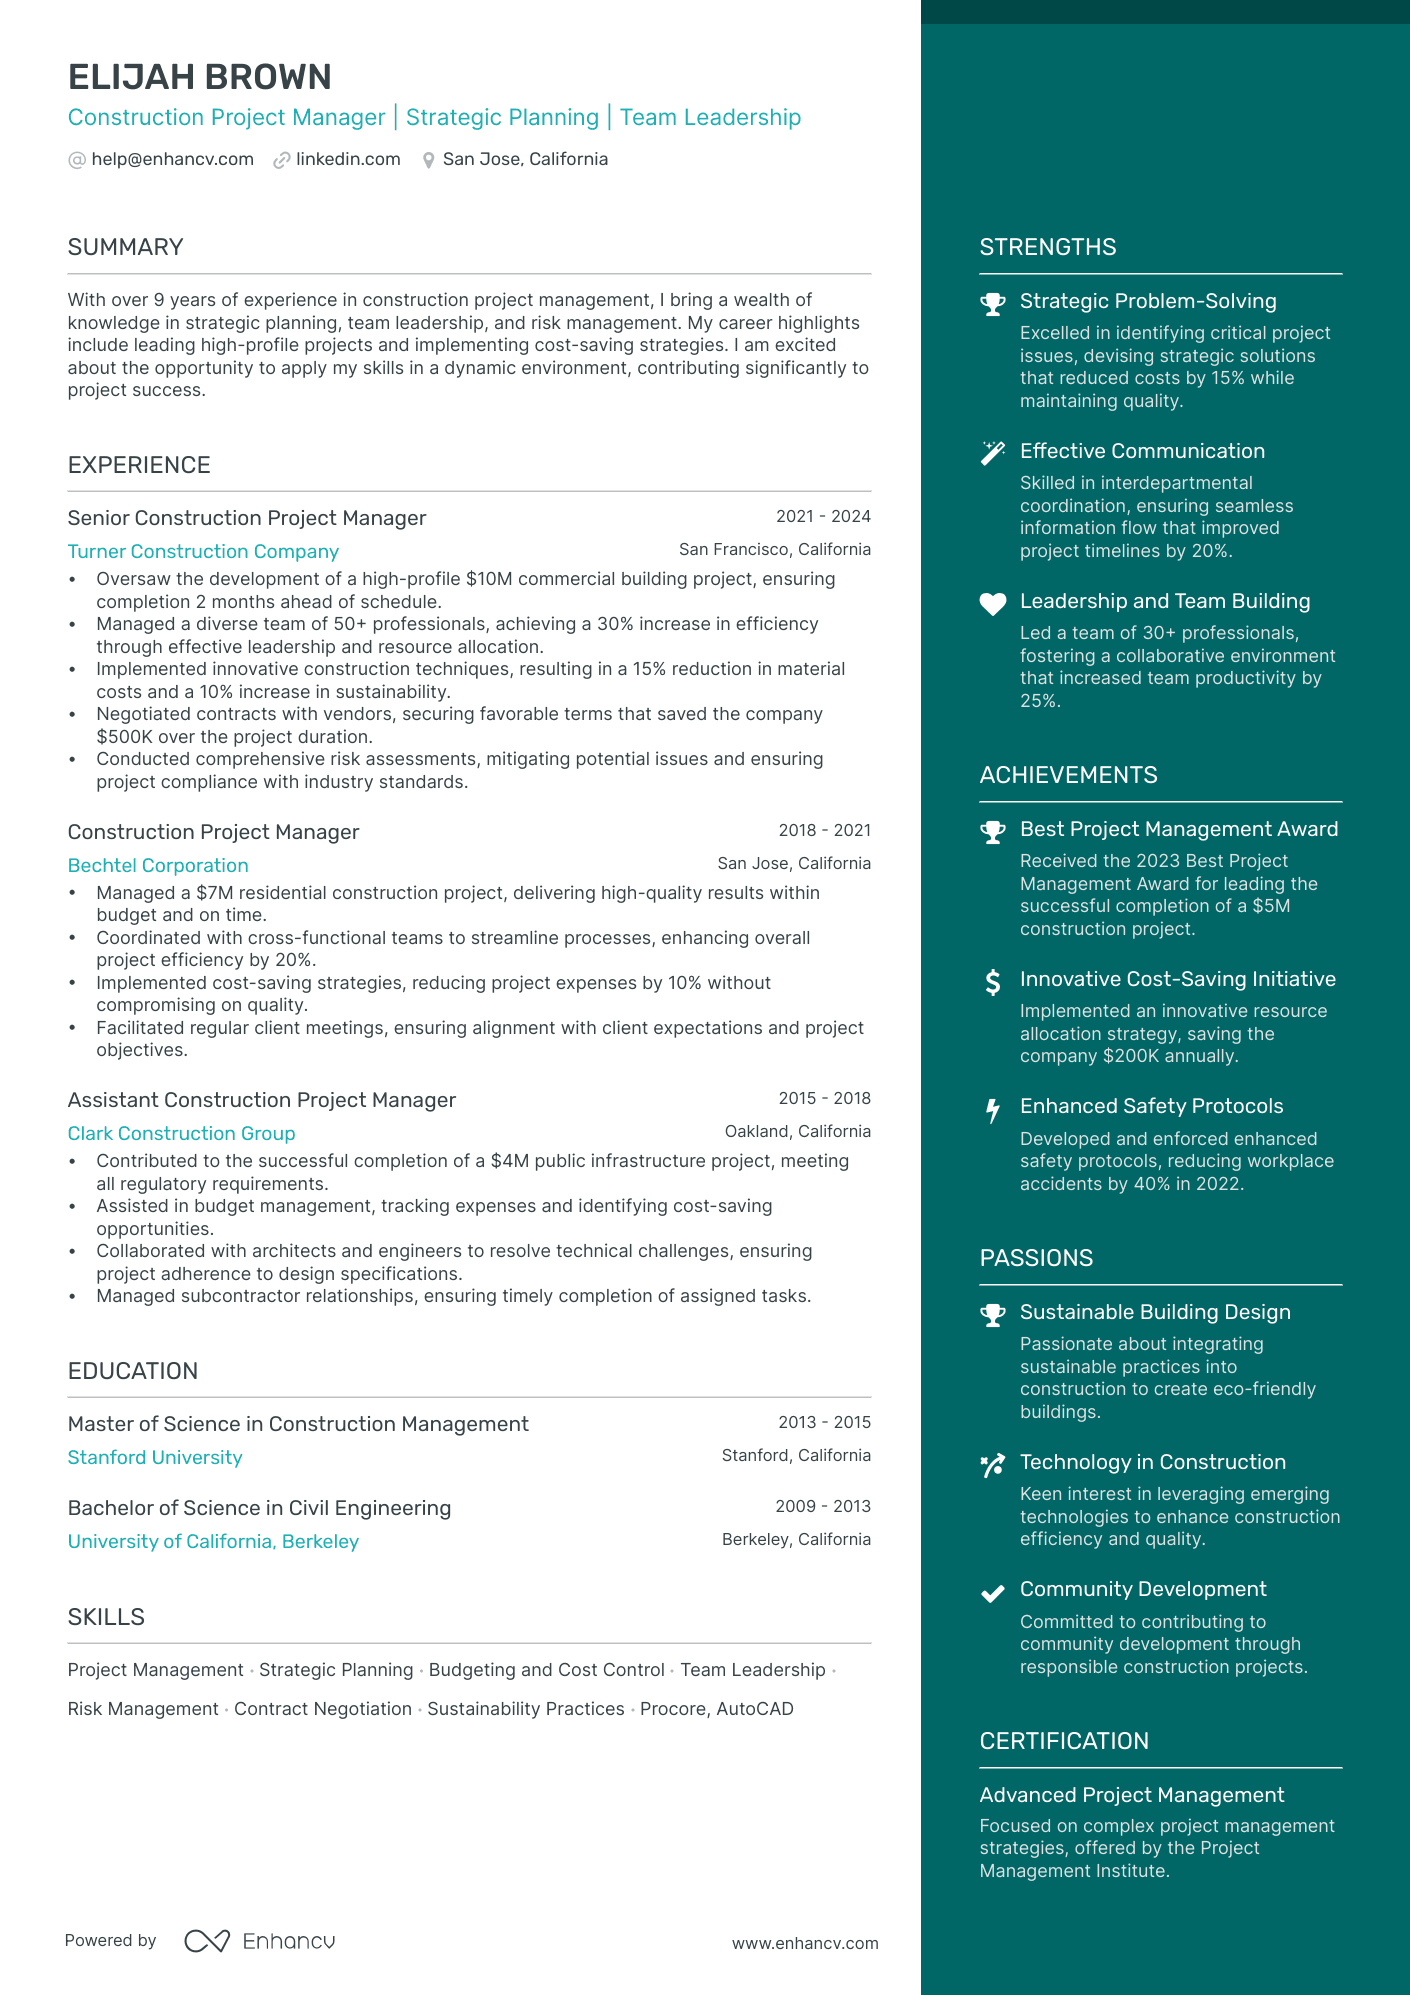 Construction Project Manager resume example